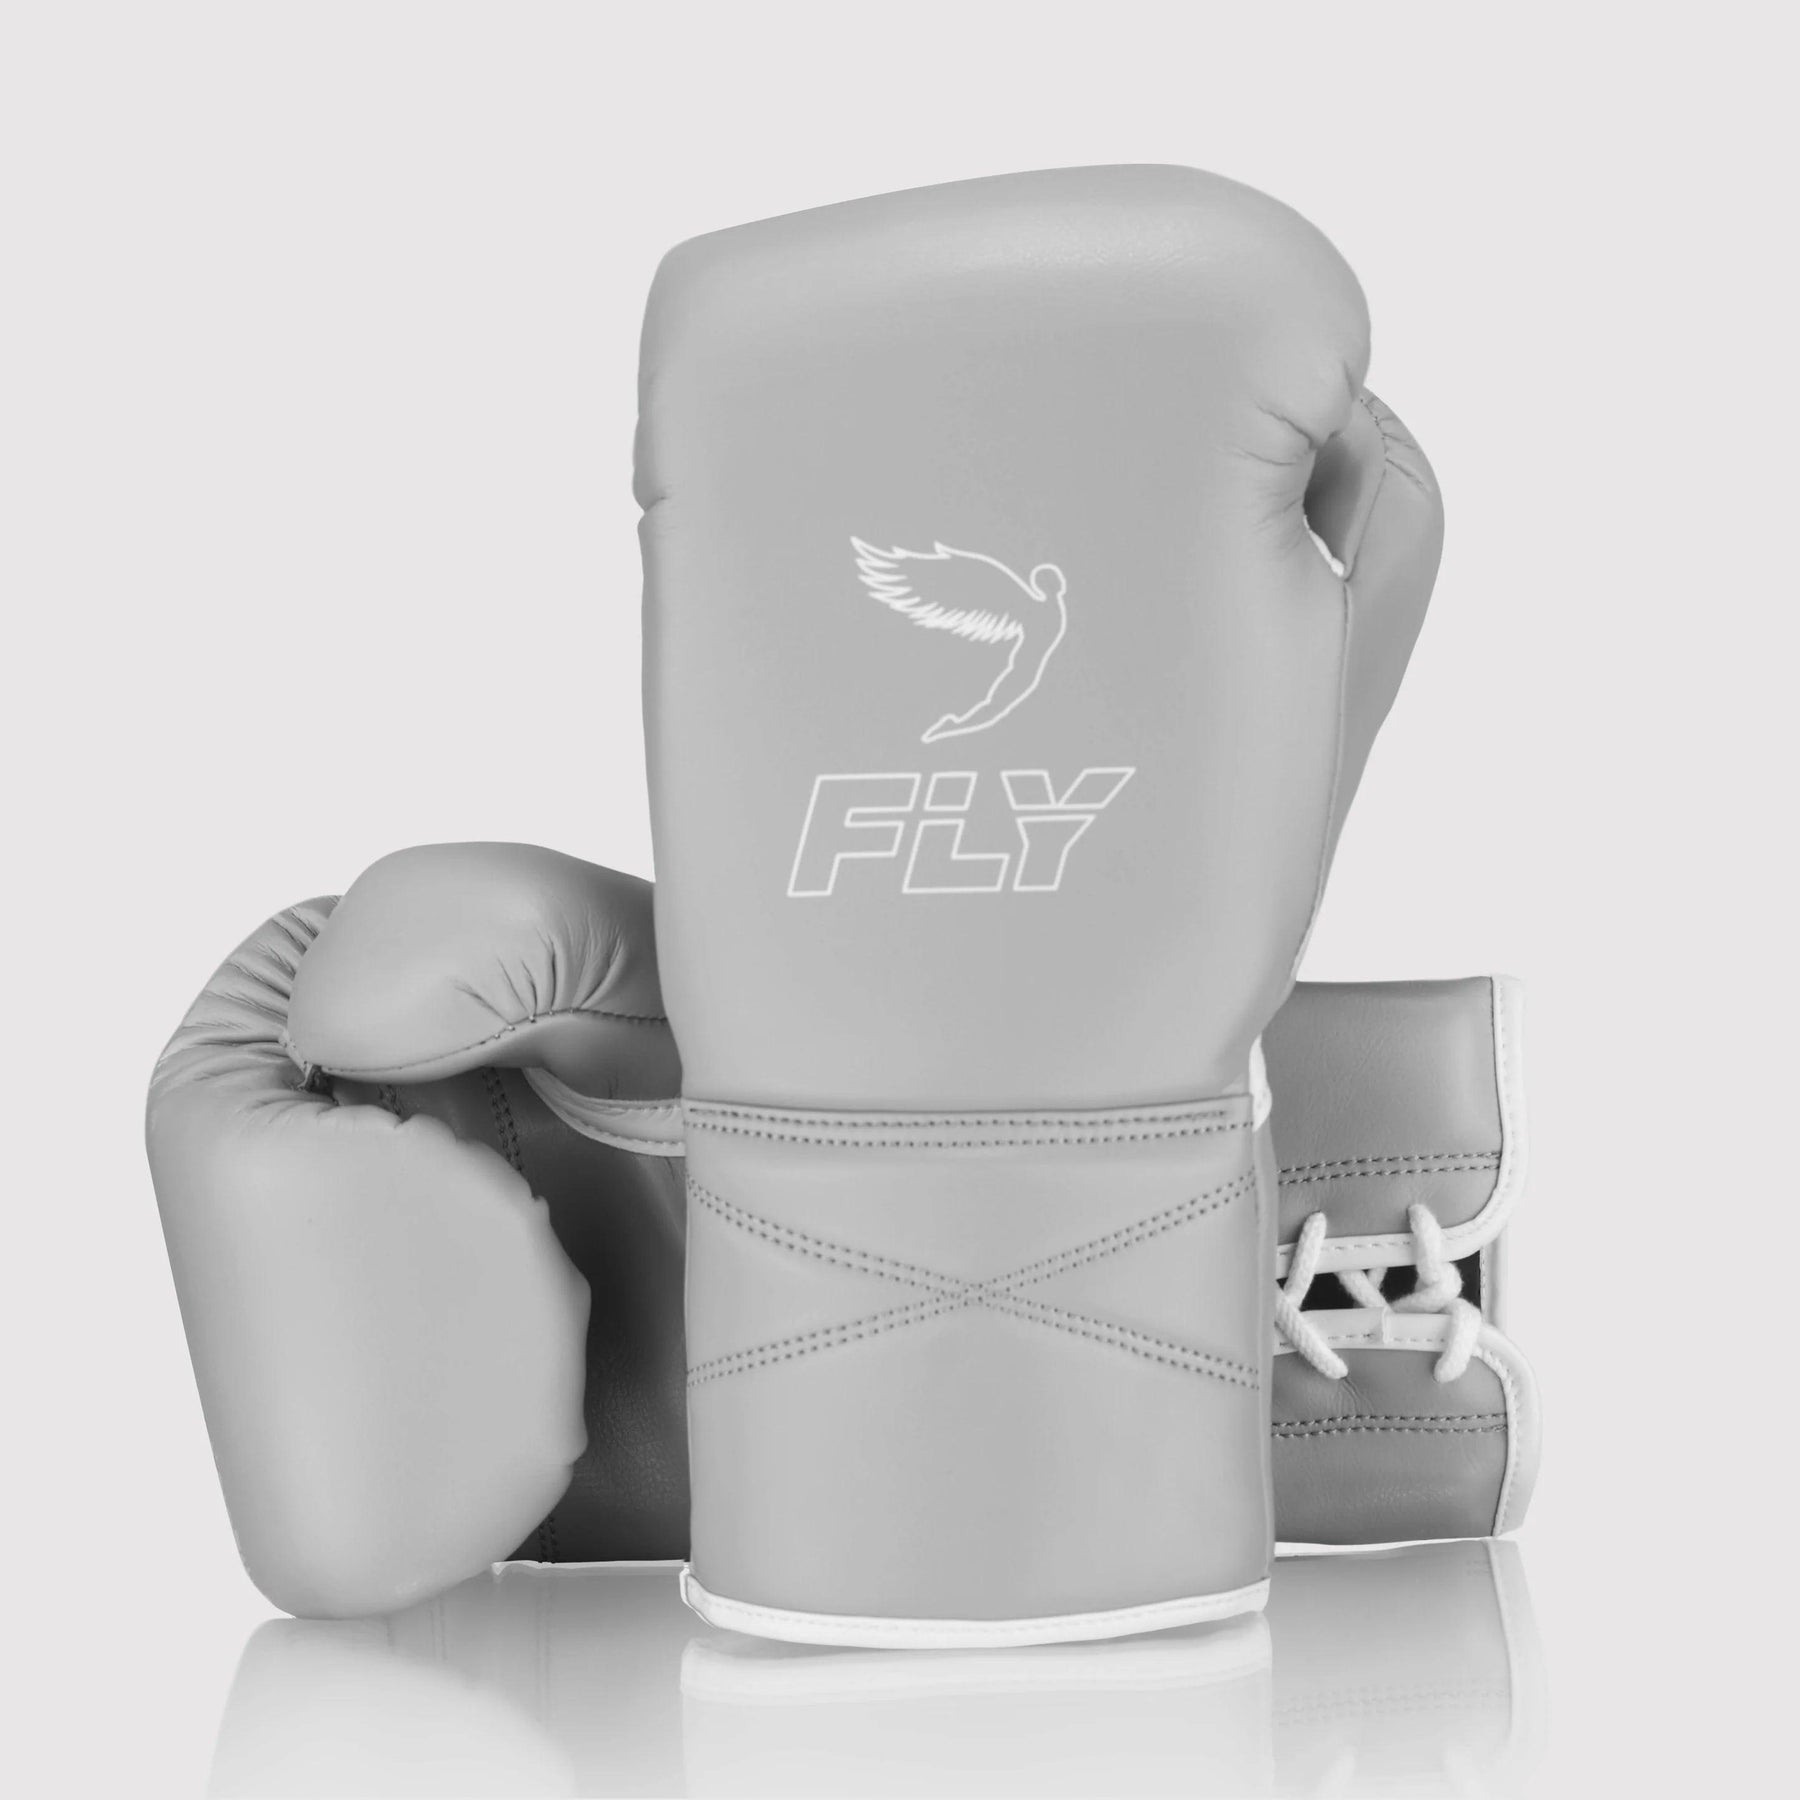 Fly Superlace X boxing gloves are used by elite amateurs and top pro boxers  – Box-Up Nation™